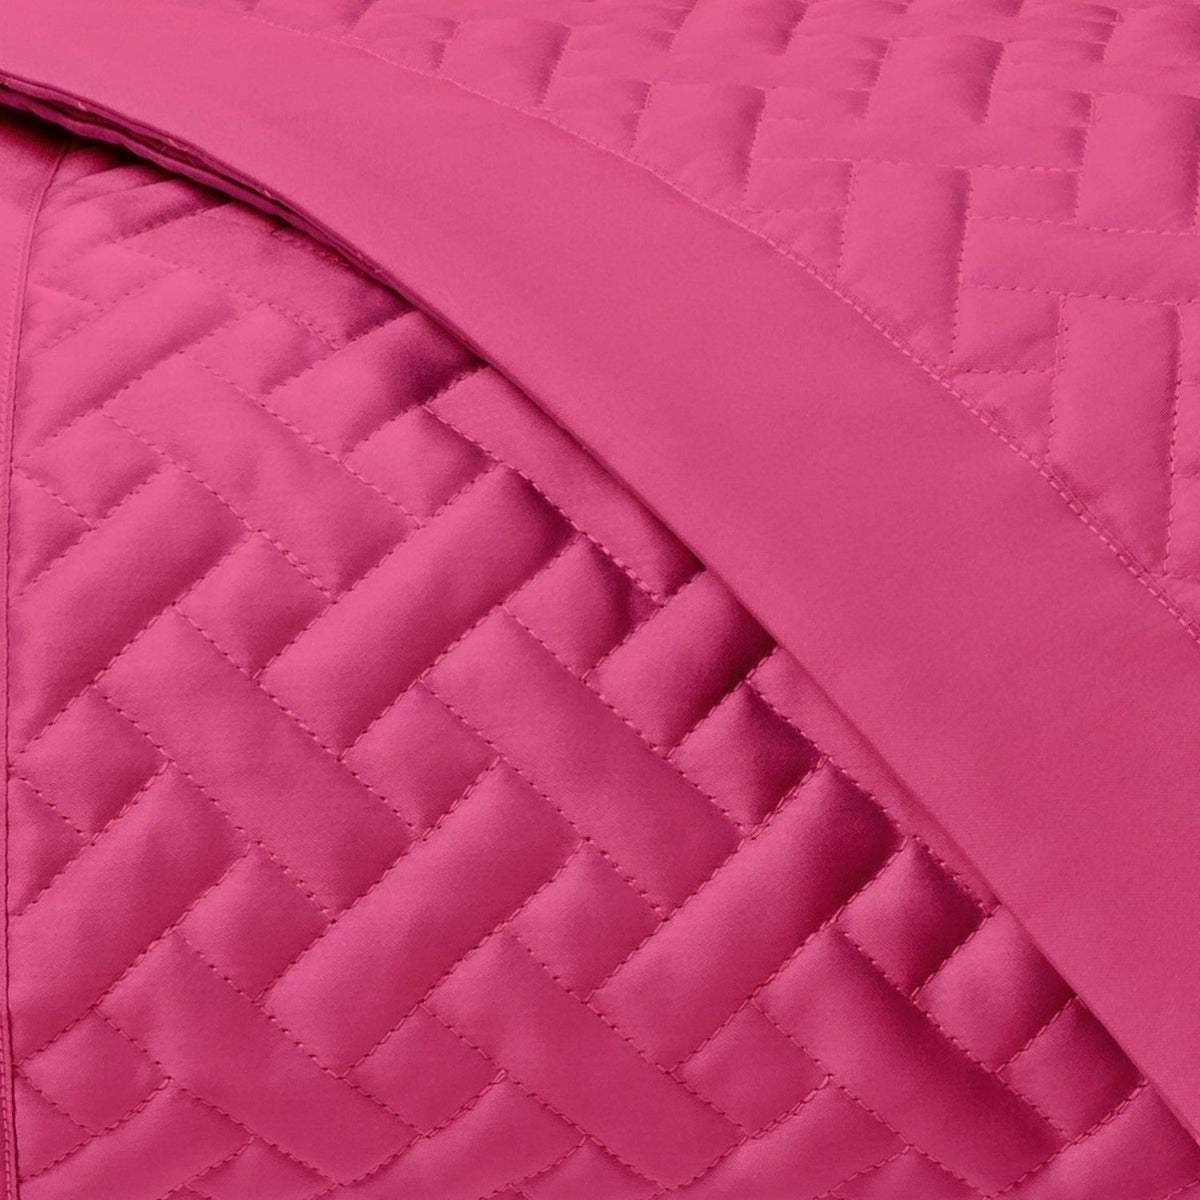 Home Treasures Basketweave Quilted Bedding Fine Linens Swatch Bright Pink